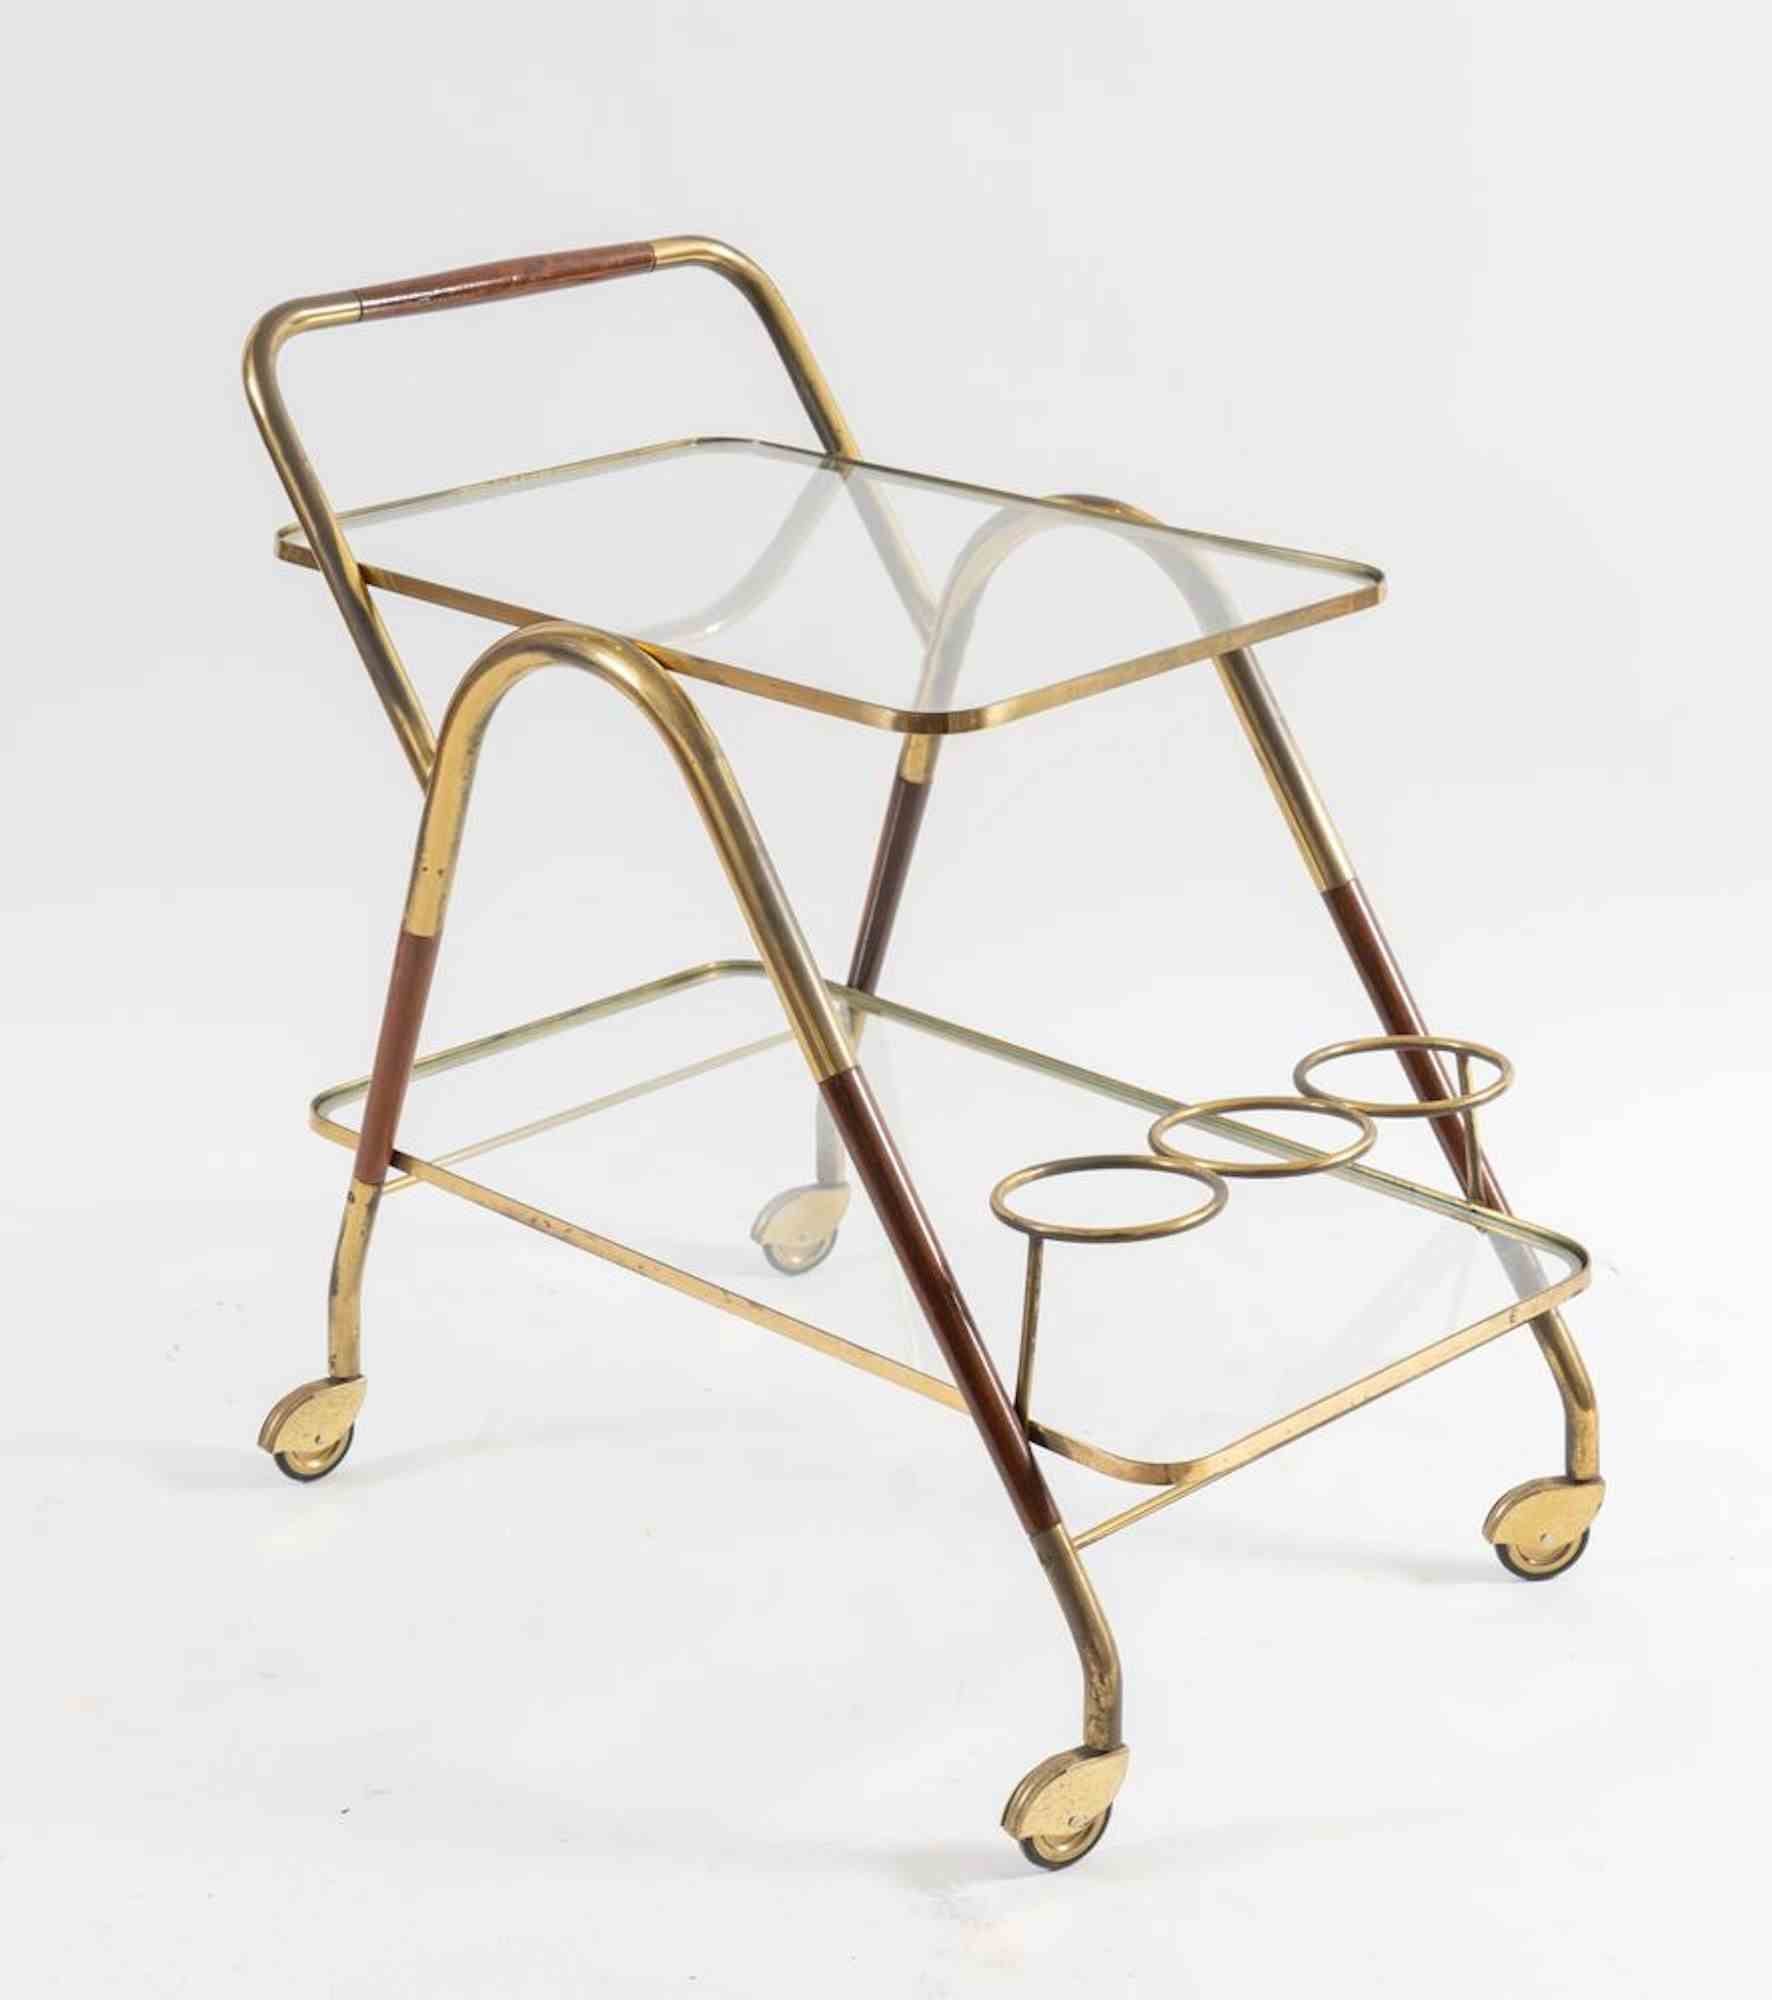 Bottle trolley with brass structure, briar details and glass shelves. Made in Italy, around 1960s.

70 x 50 x 74 cm. 

Good conditions.